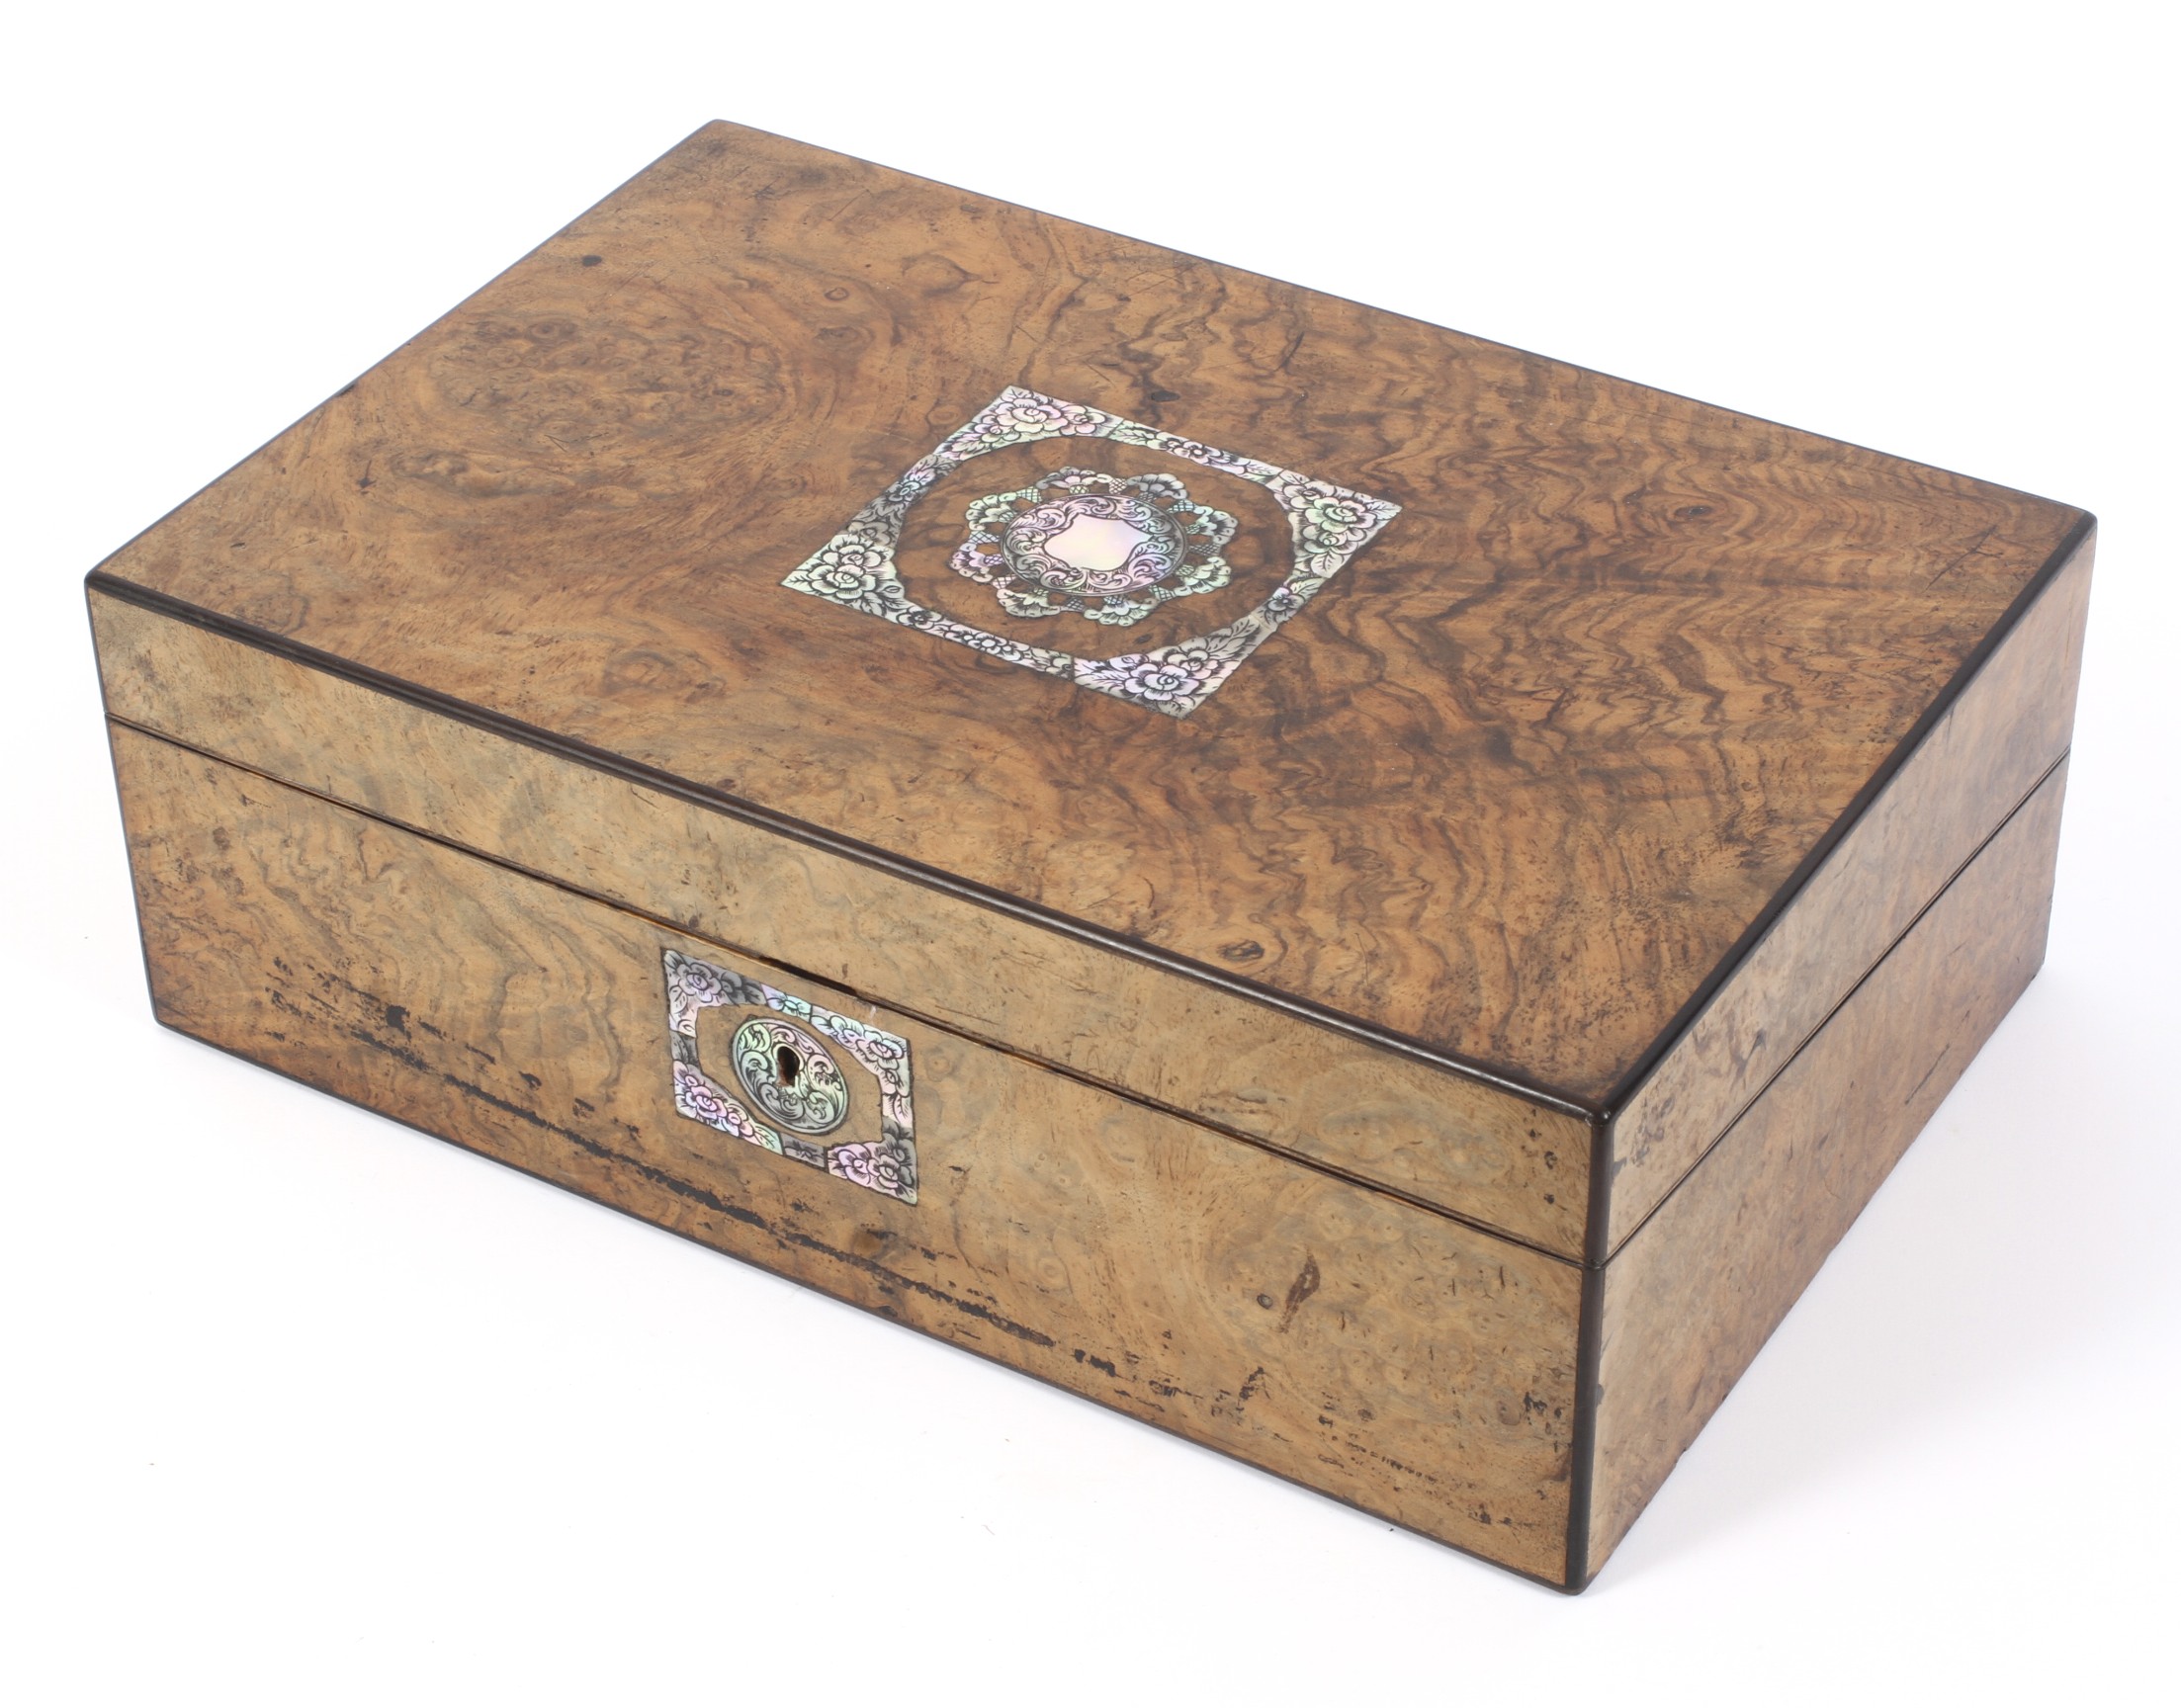 A Victorian walnut and mother-of-pearl inlaid stationary box.